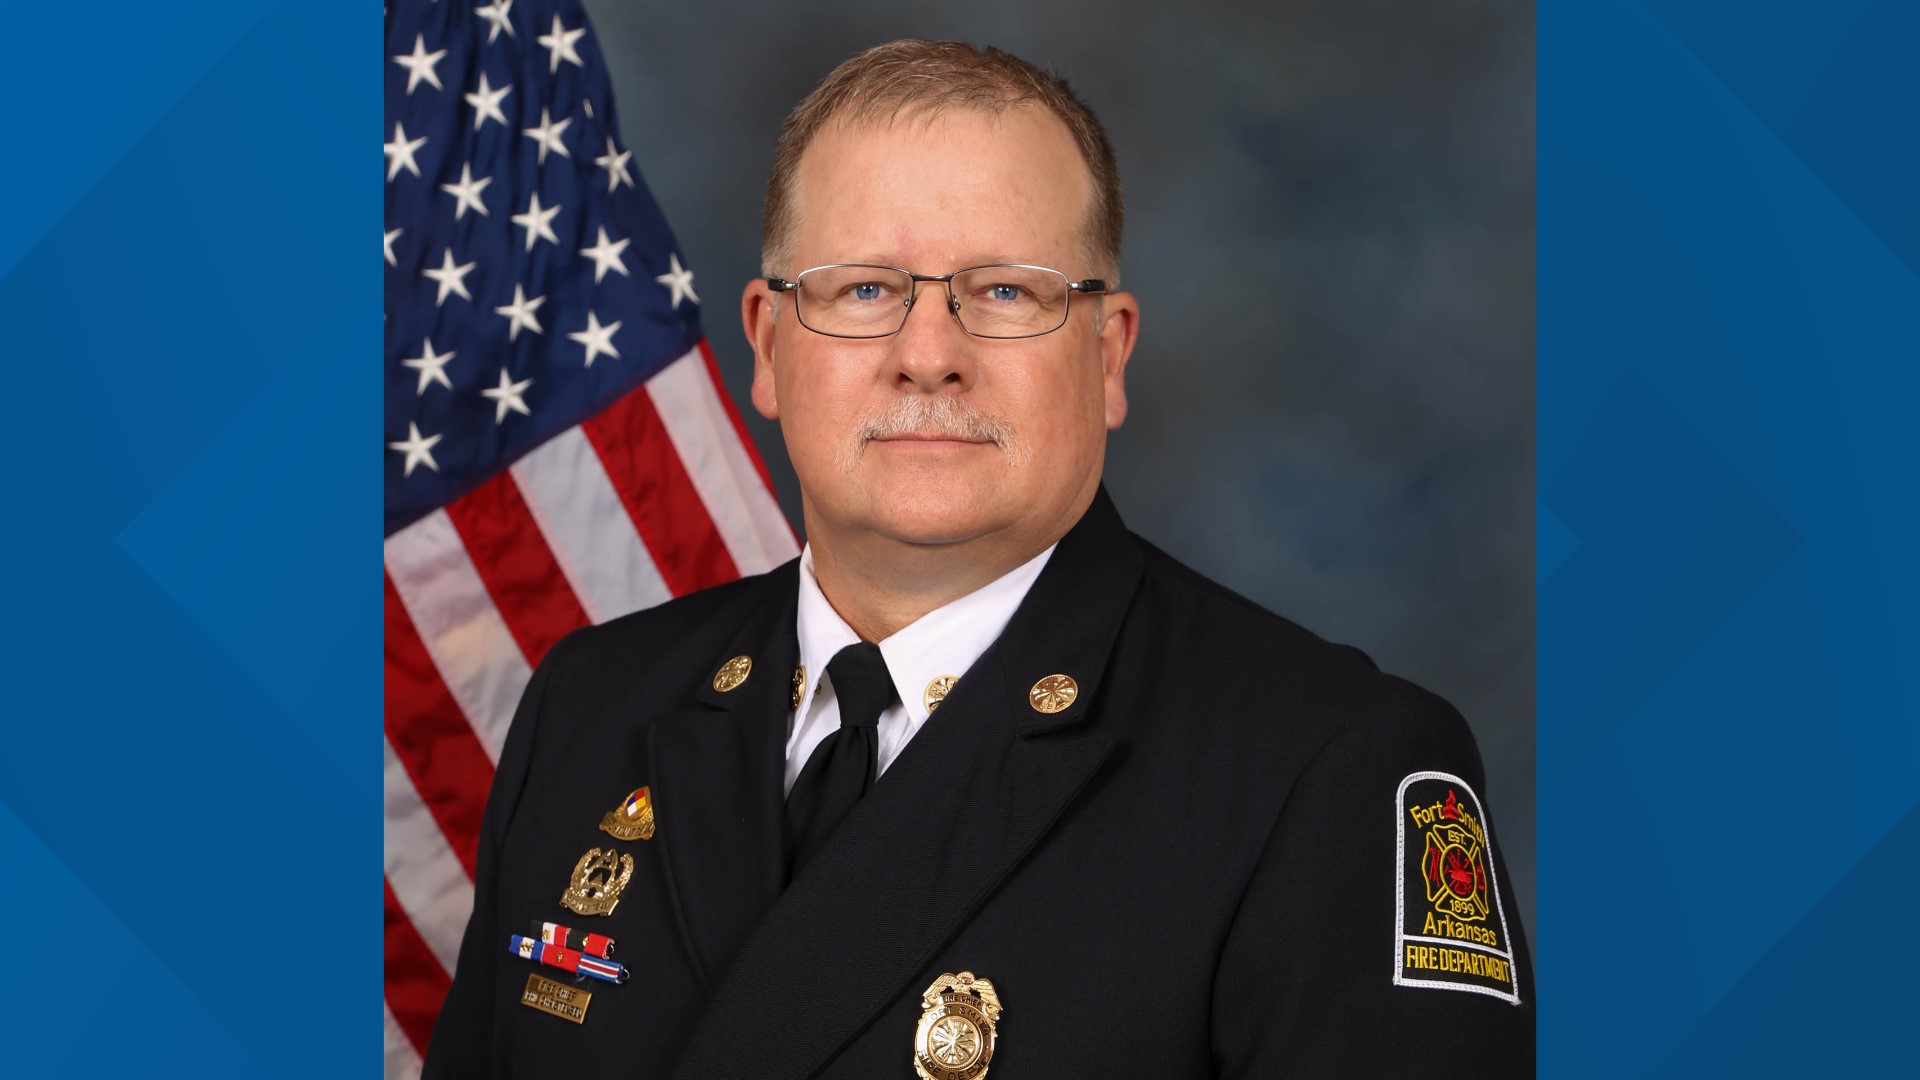 The City of Fort Smith says Chief Christensen battled cancer for the last nine months and his death will be considered a line-of-duty death.